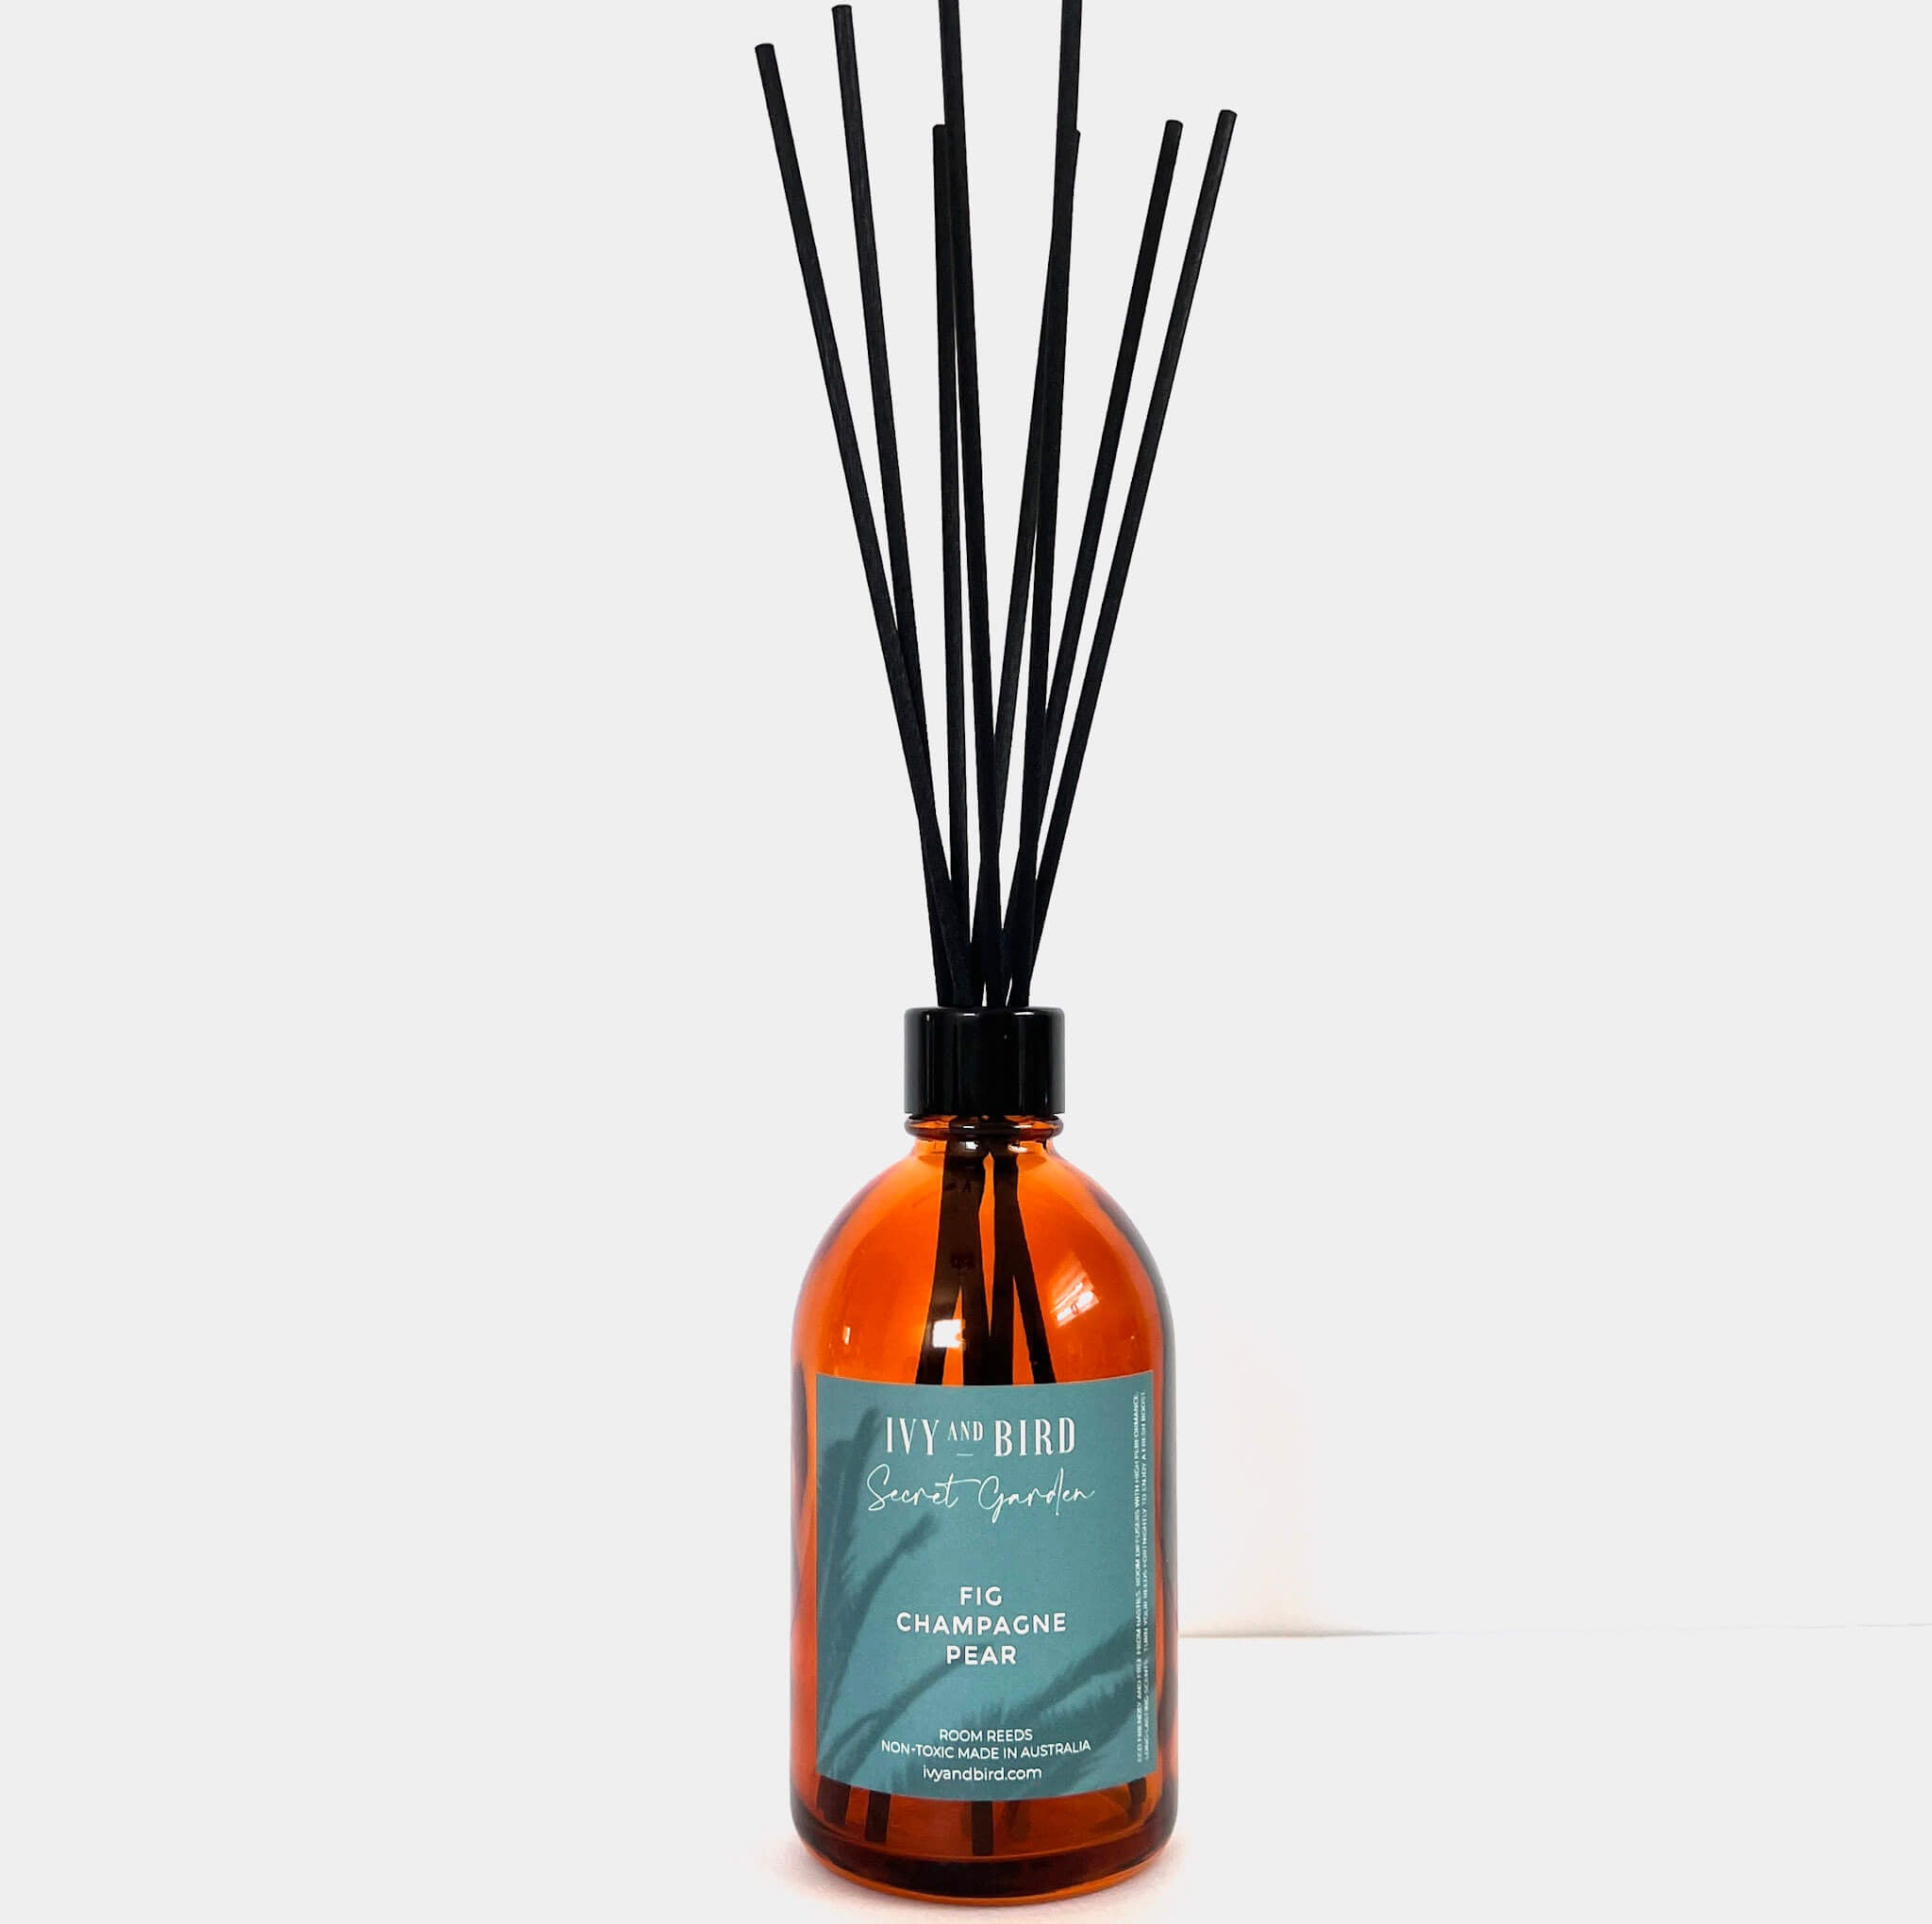 FIG CHAMPAGNE + PEAR {SECRET GARDEN} REED DIFFUSER